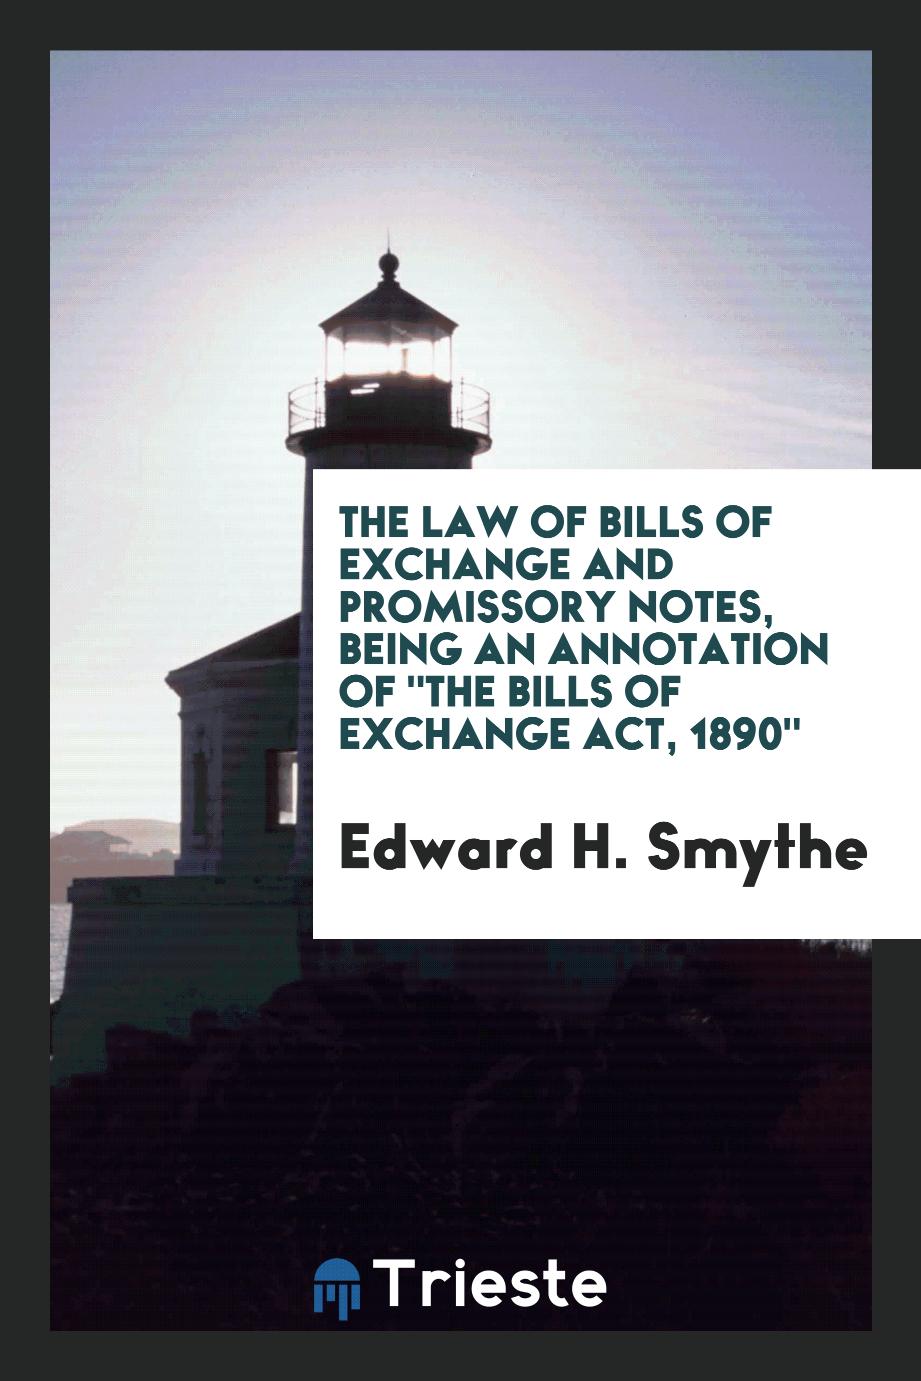 The law of bills of exchange and promissory notes, being an annotation of "The Bills of Exchange Act, 1890"